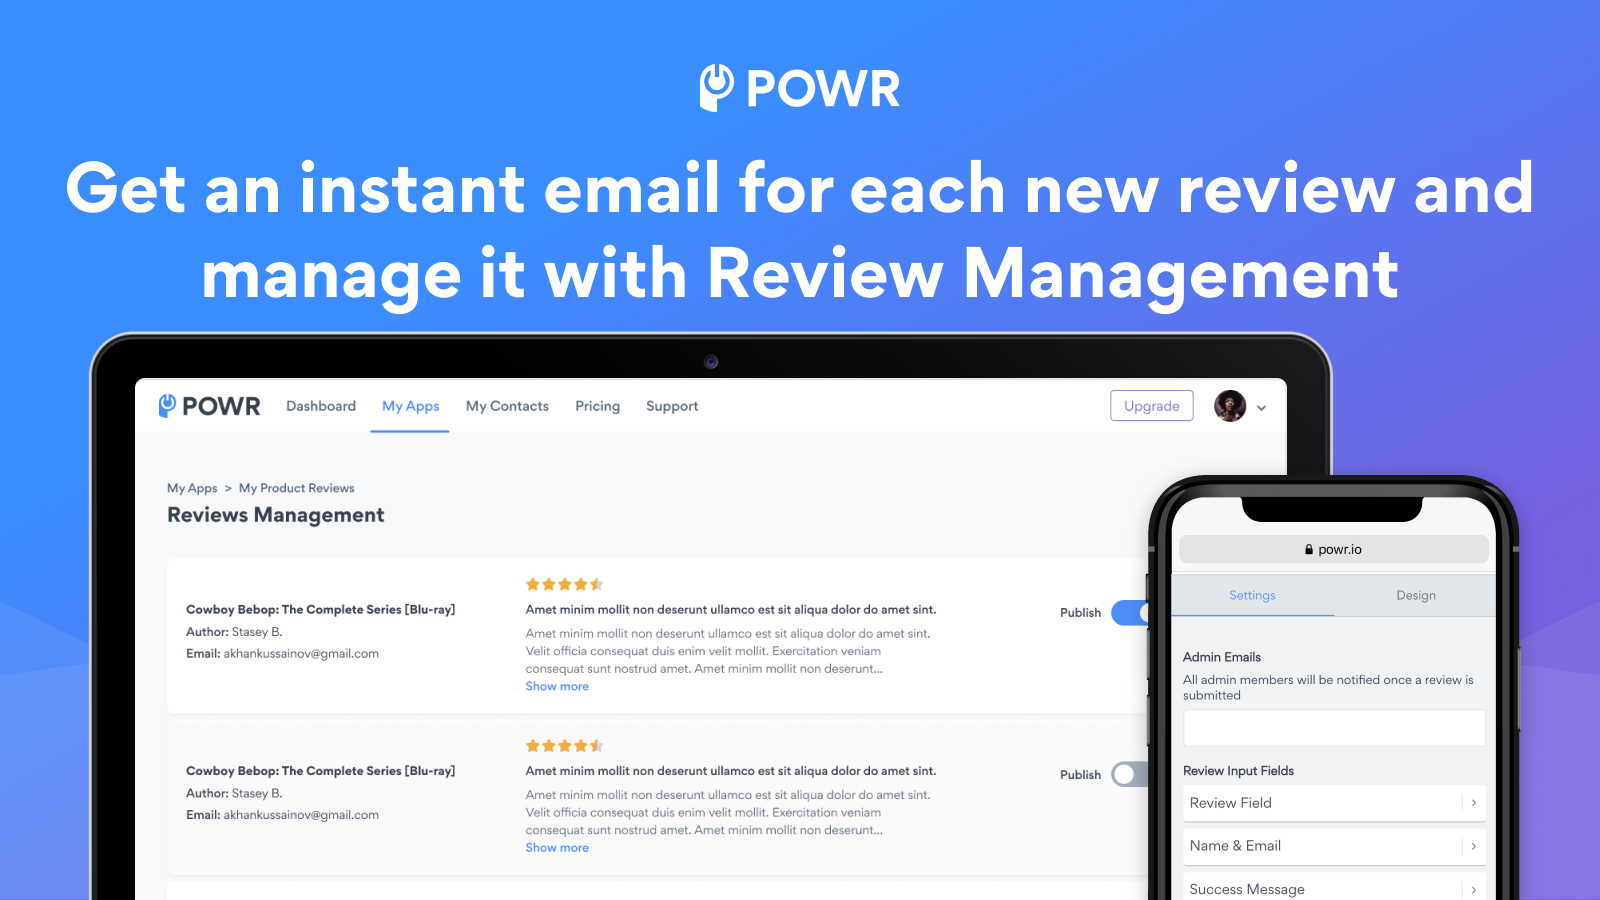 Get instant email notifications for each new review.